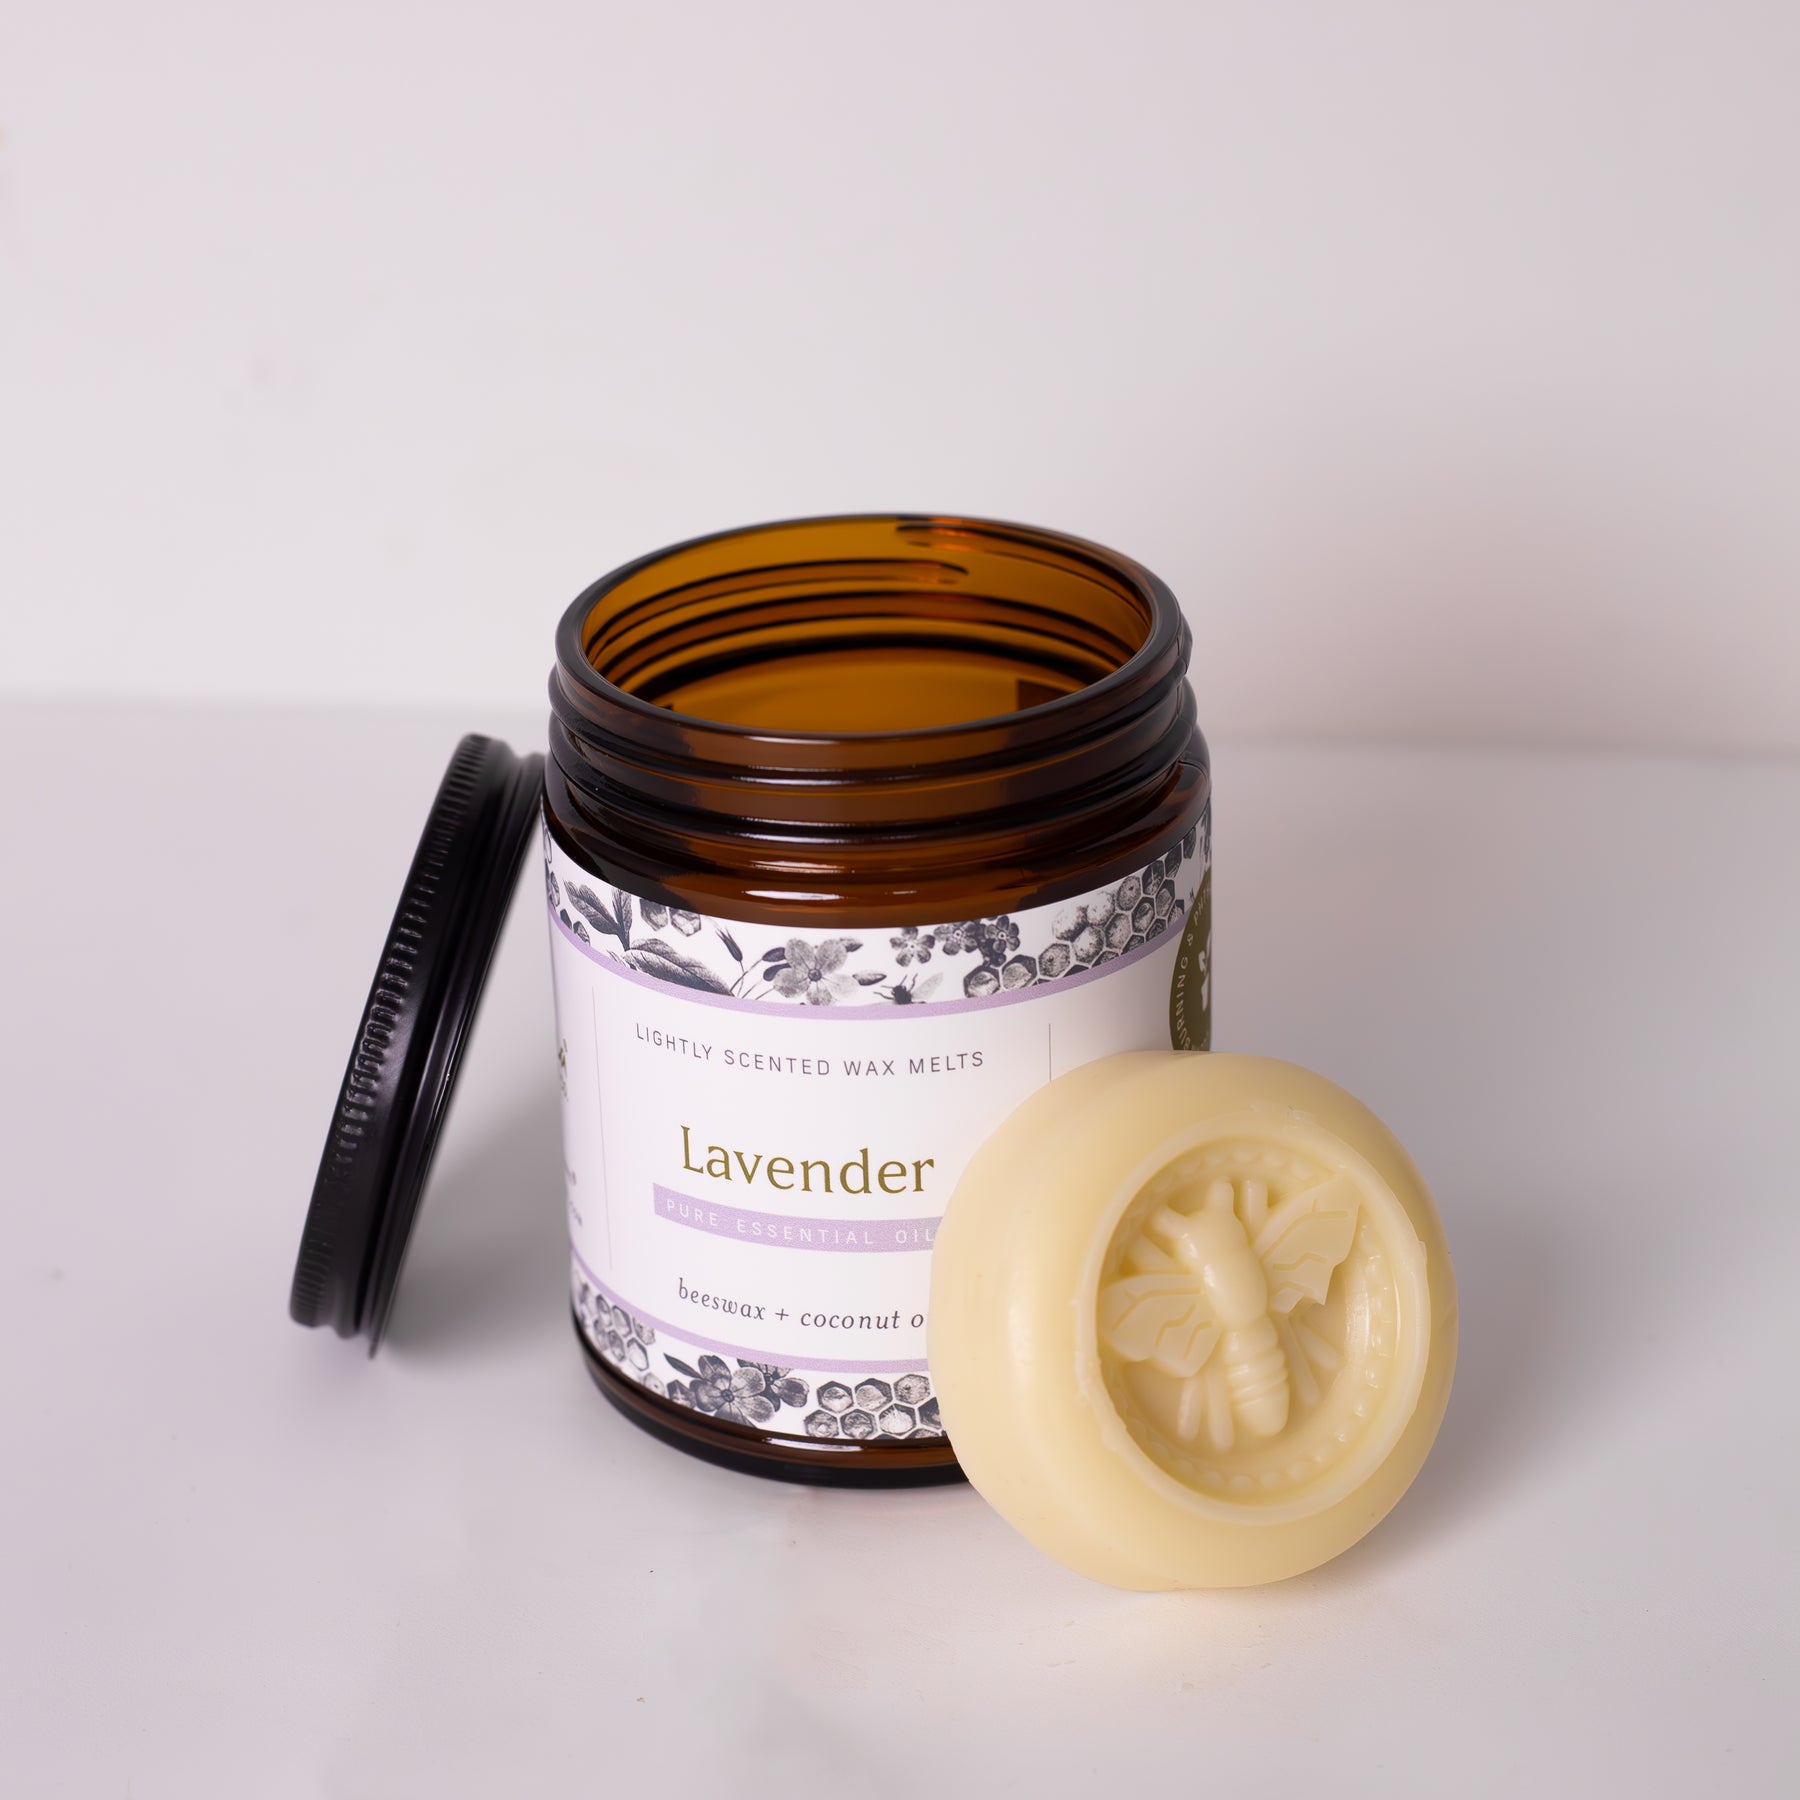  Lavender Essential Oil - Scented Wax Melts for Wax